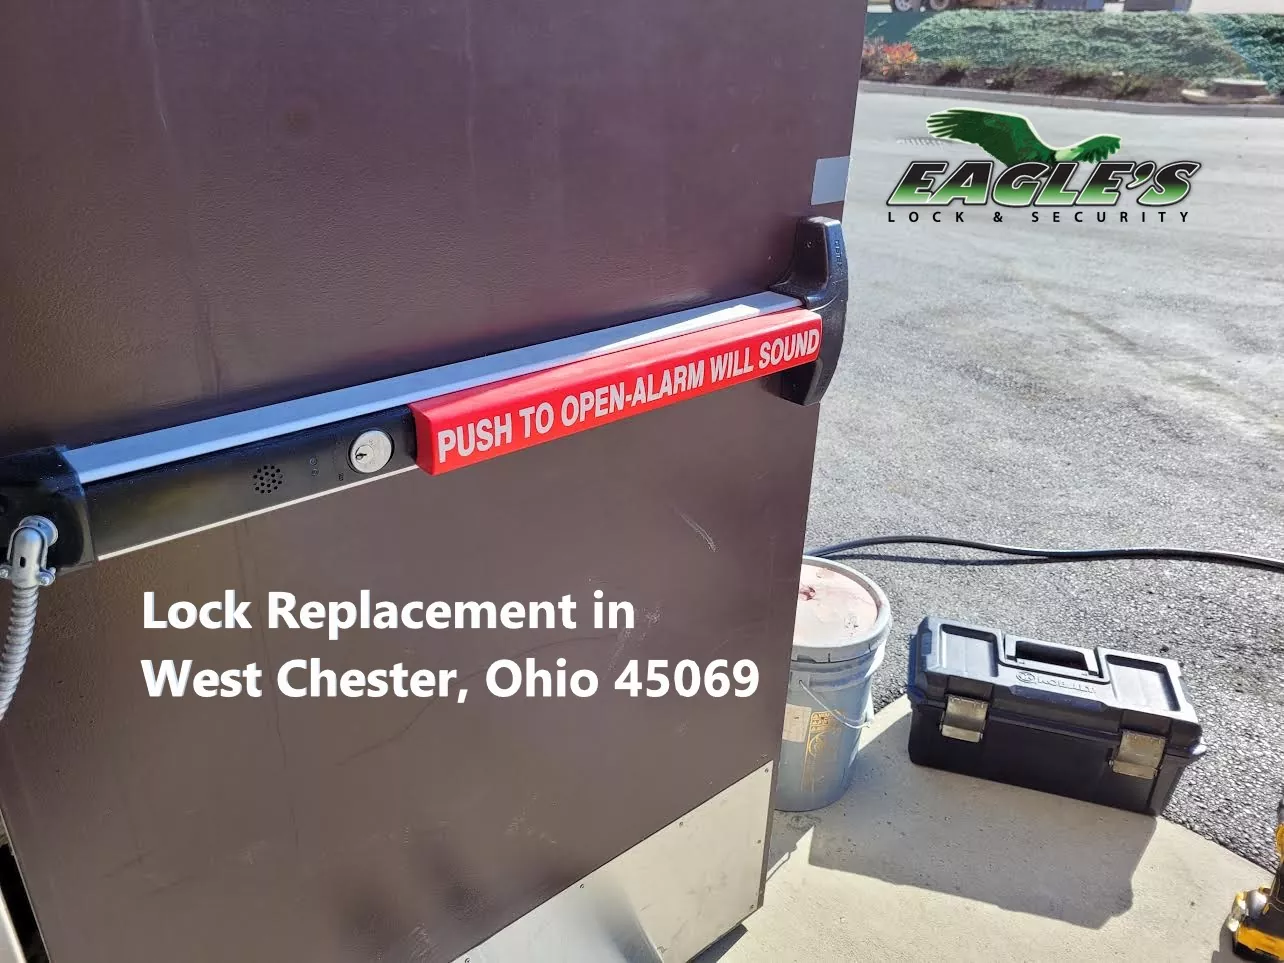 Lock Replacement in West Chester, Ohio 45069